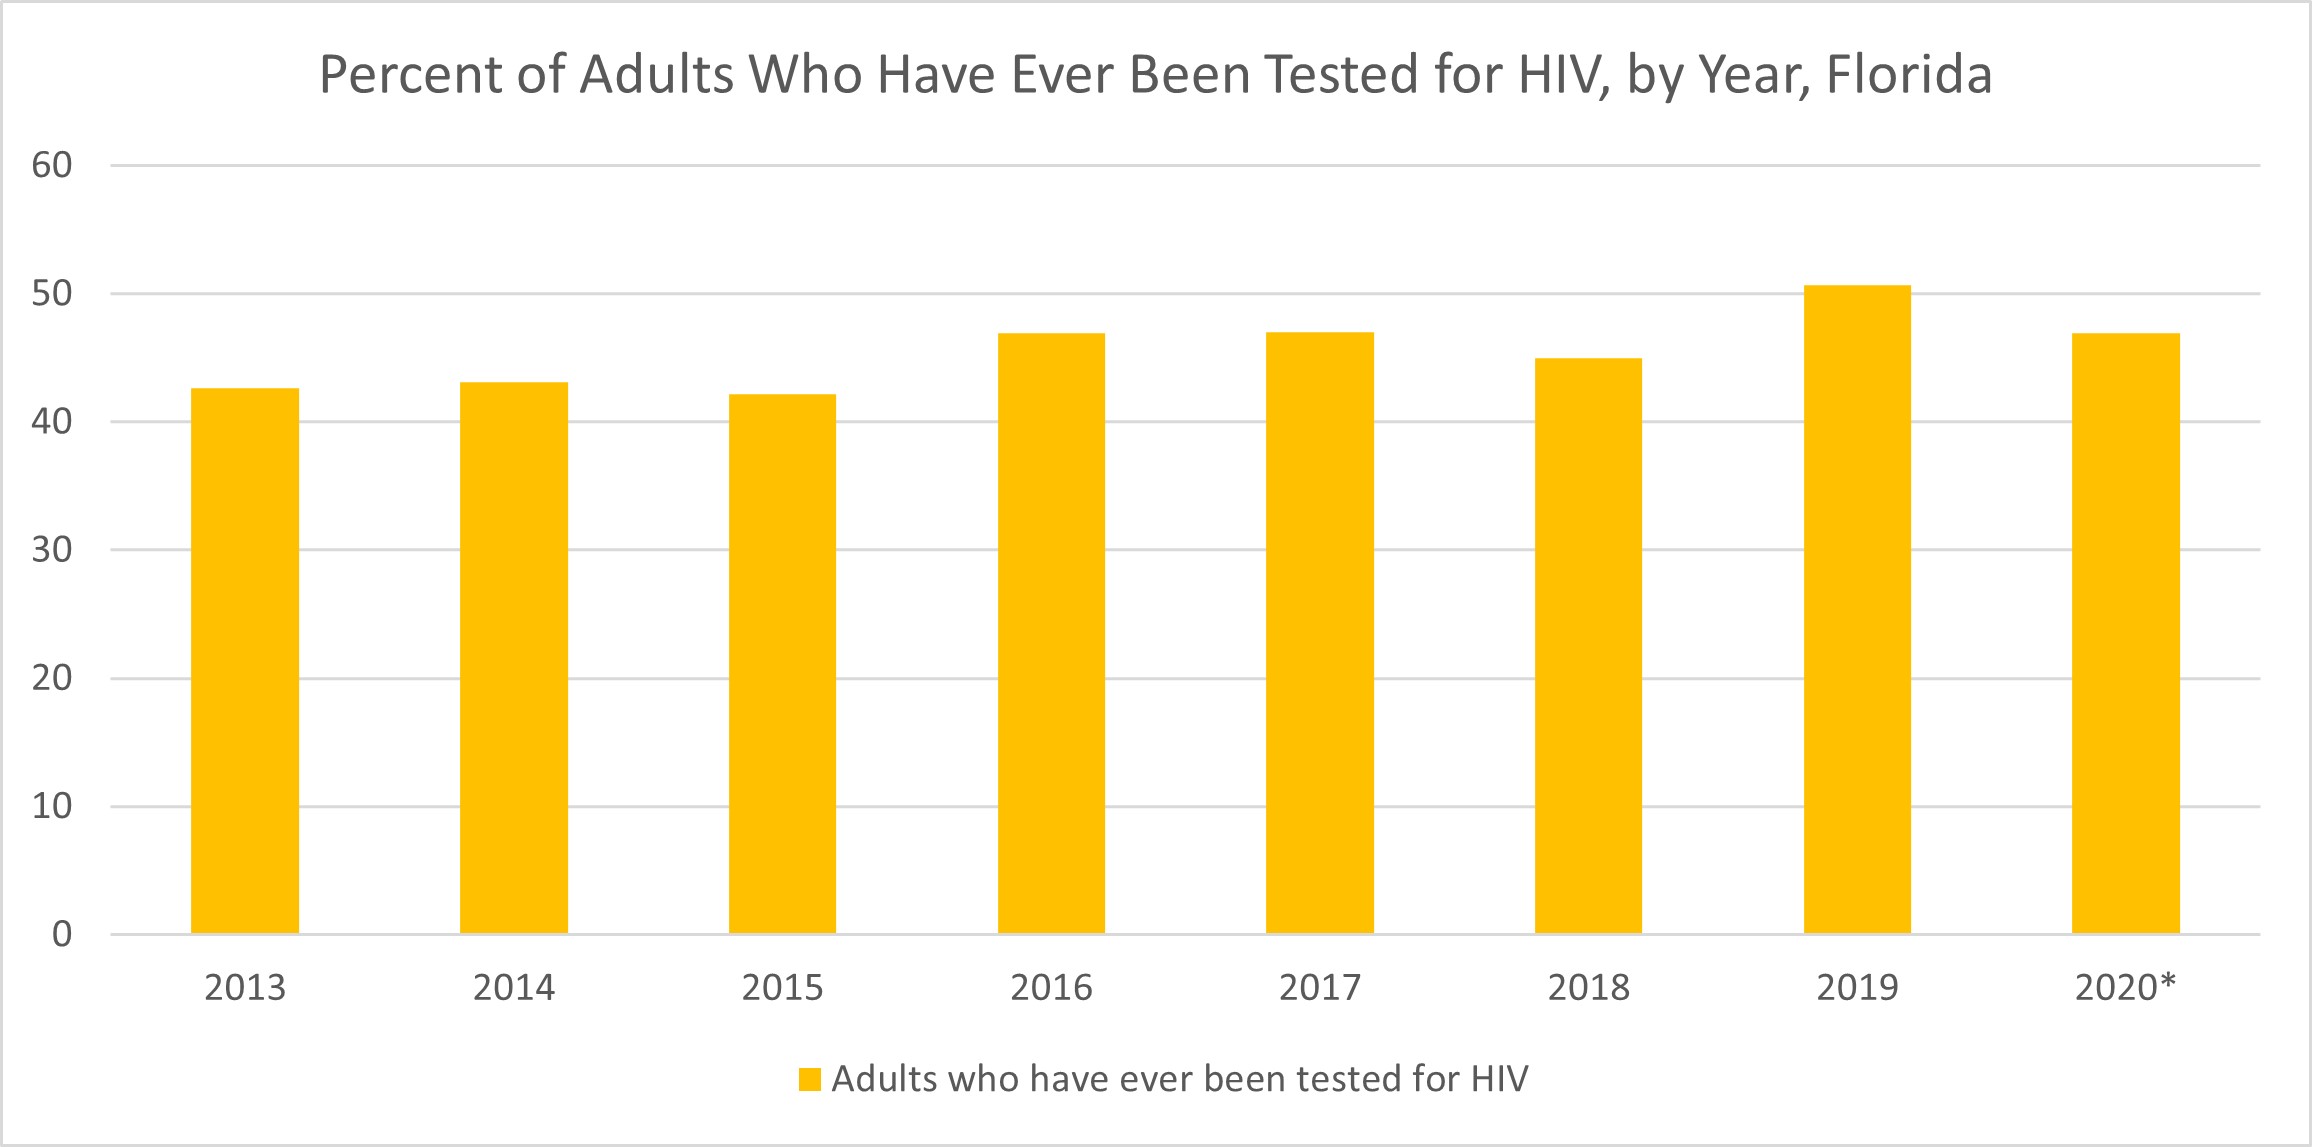 Percent of Adults Who Have Ever Been Tested for HIV, by Year, Florida